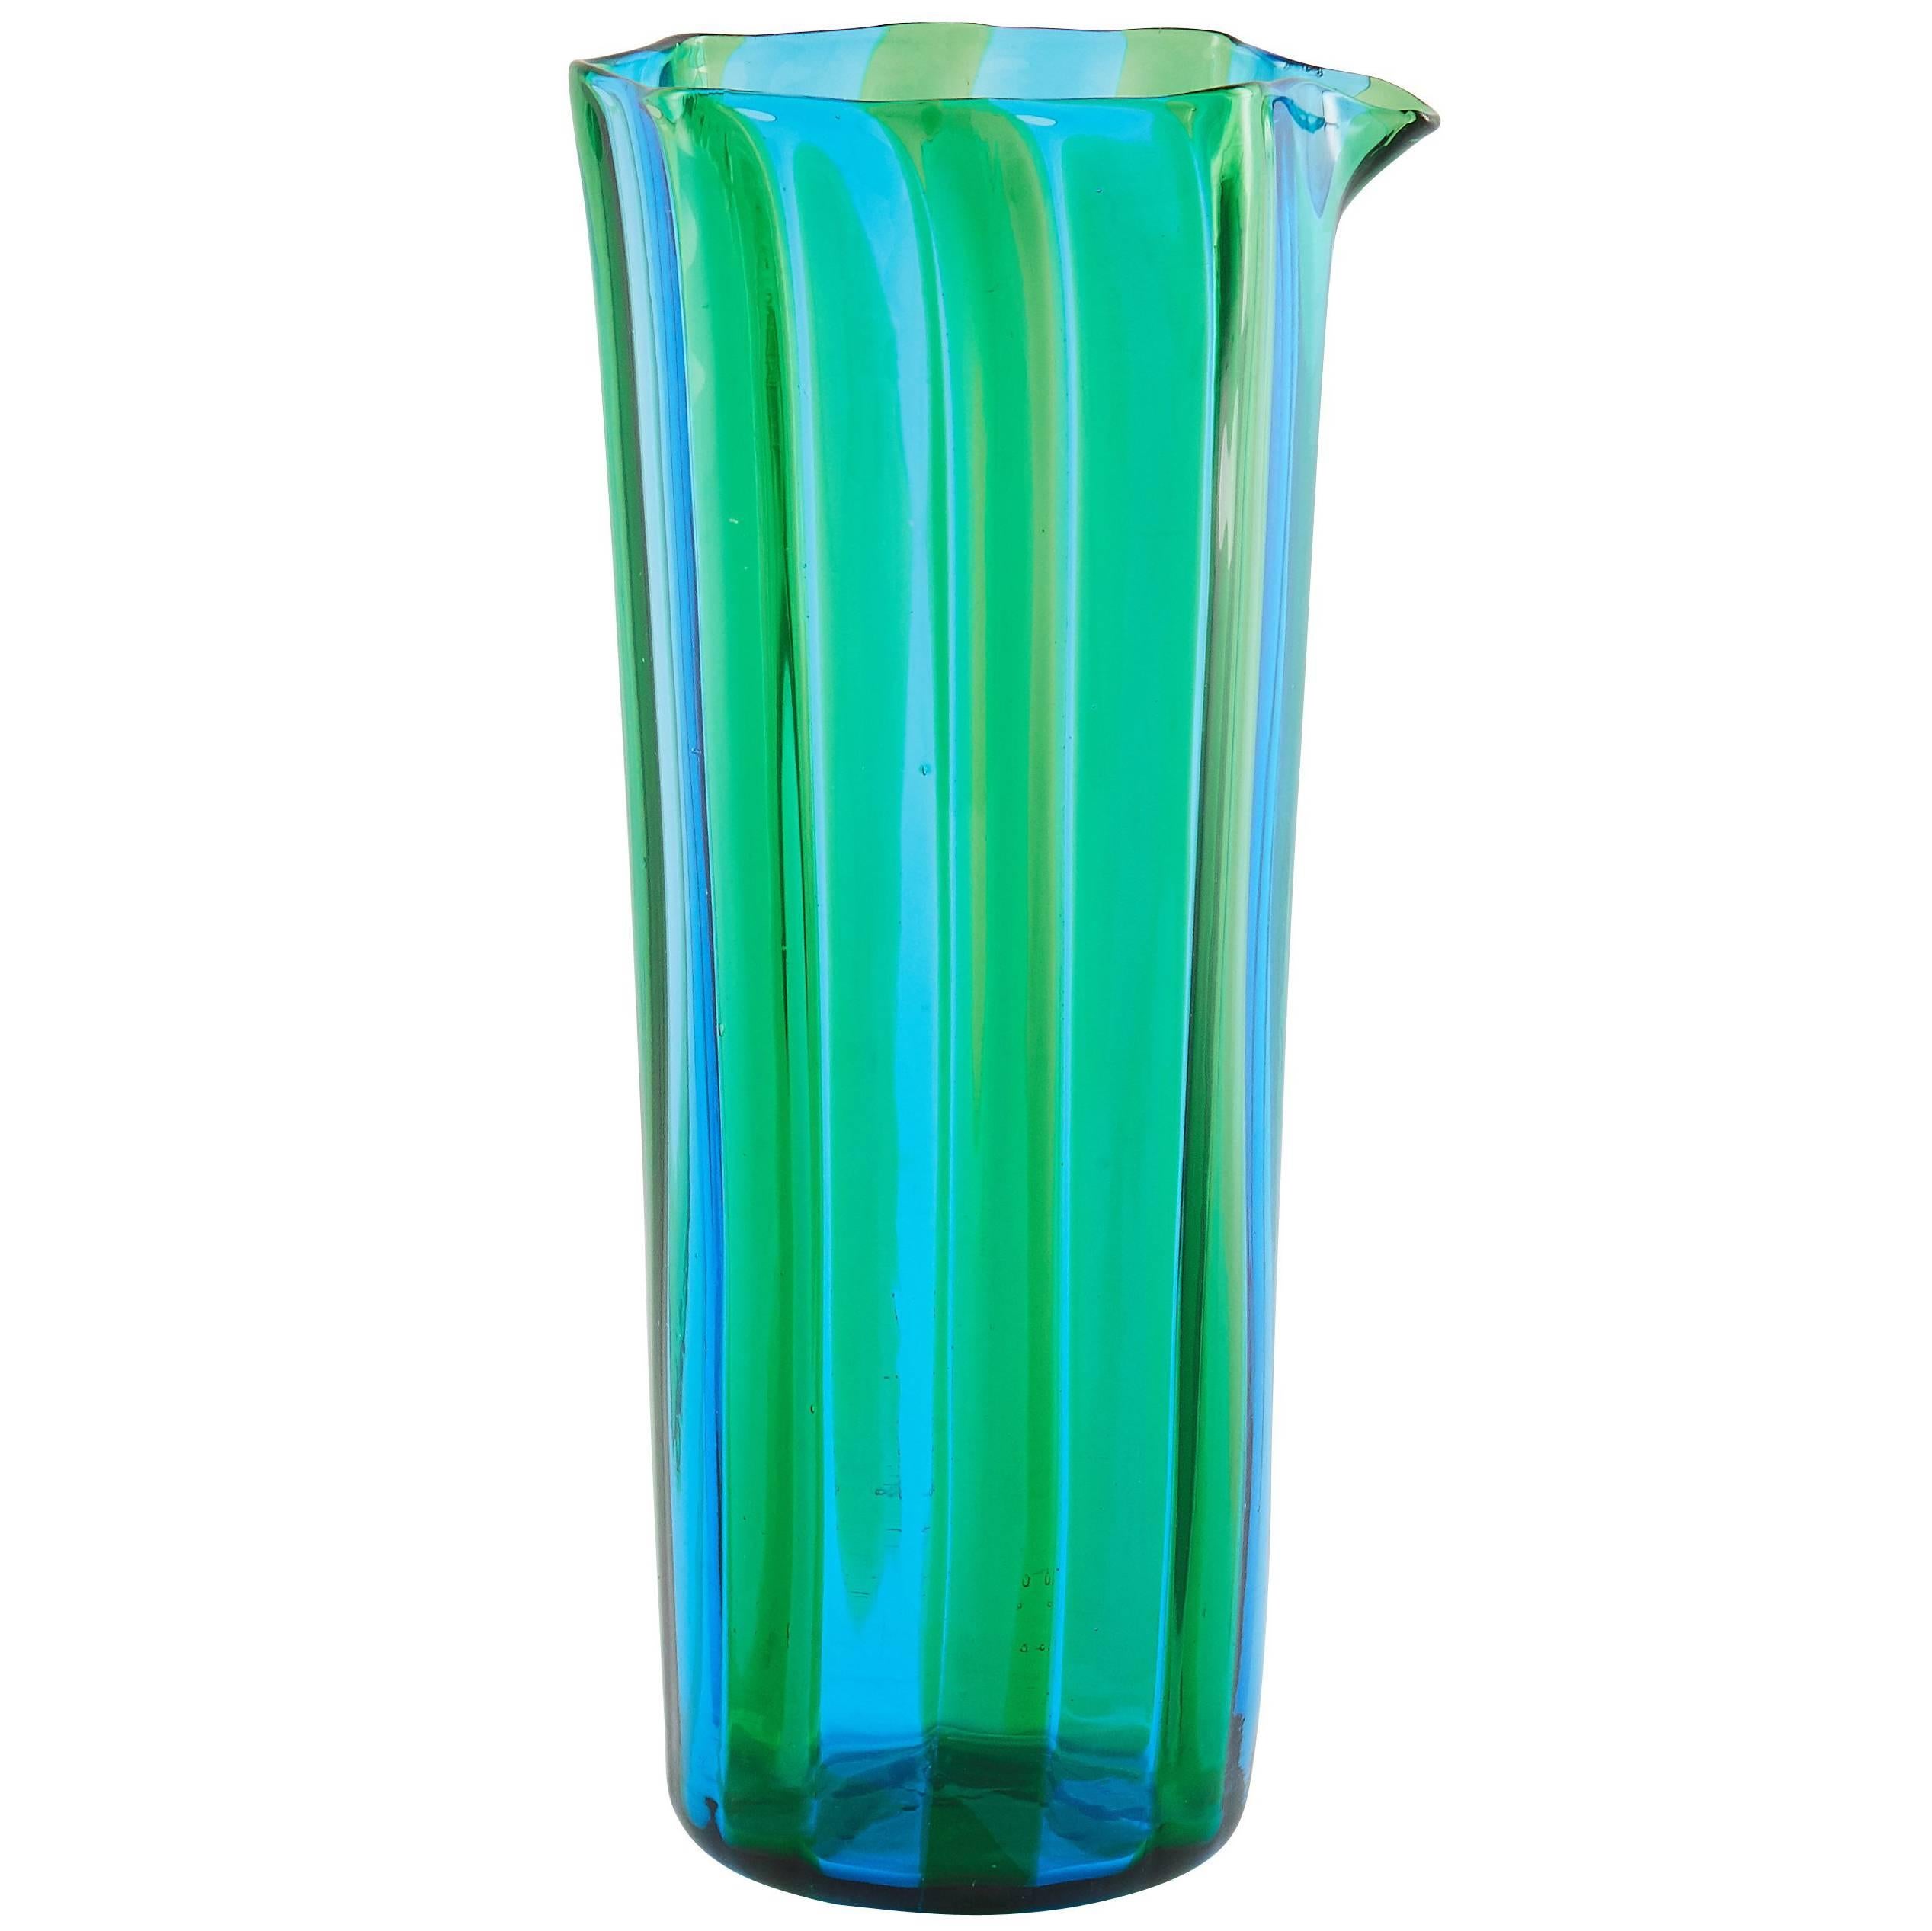 Campbell-Rey Octagonal Striped Carafe in Green and Turquoise Murano Glass